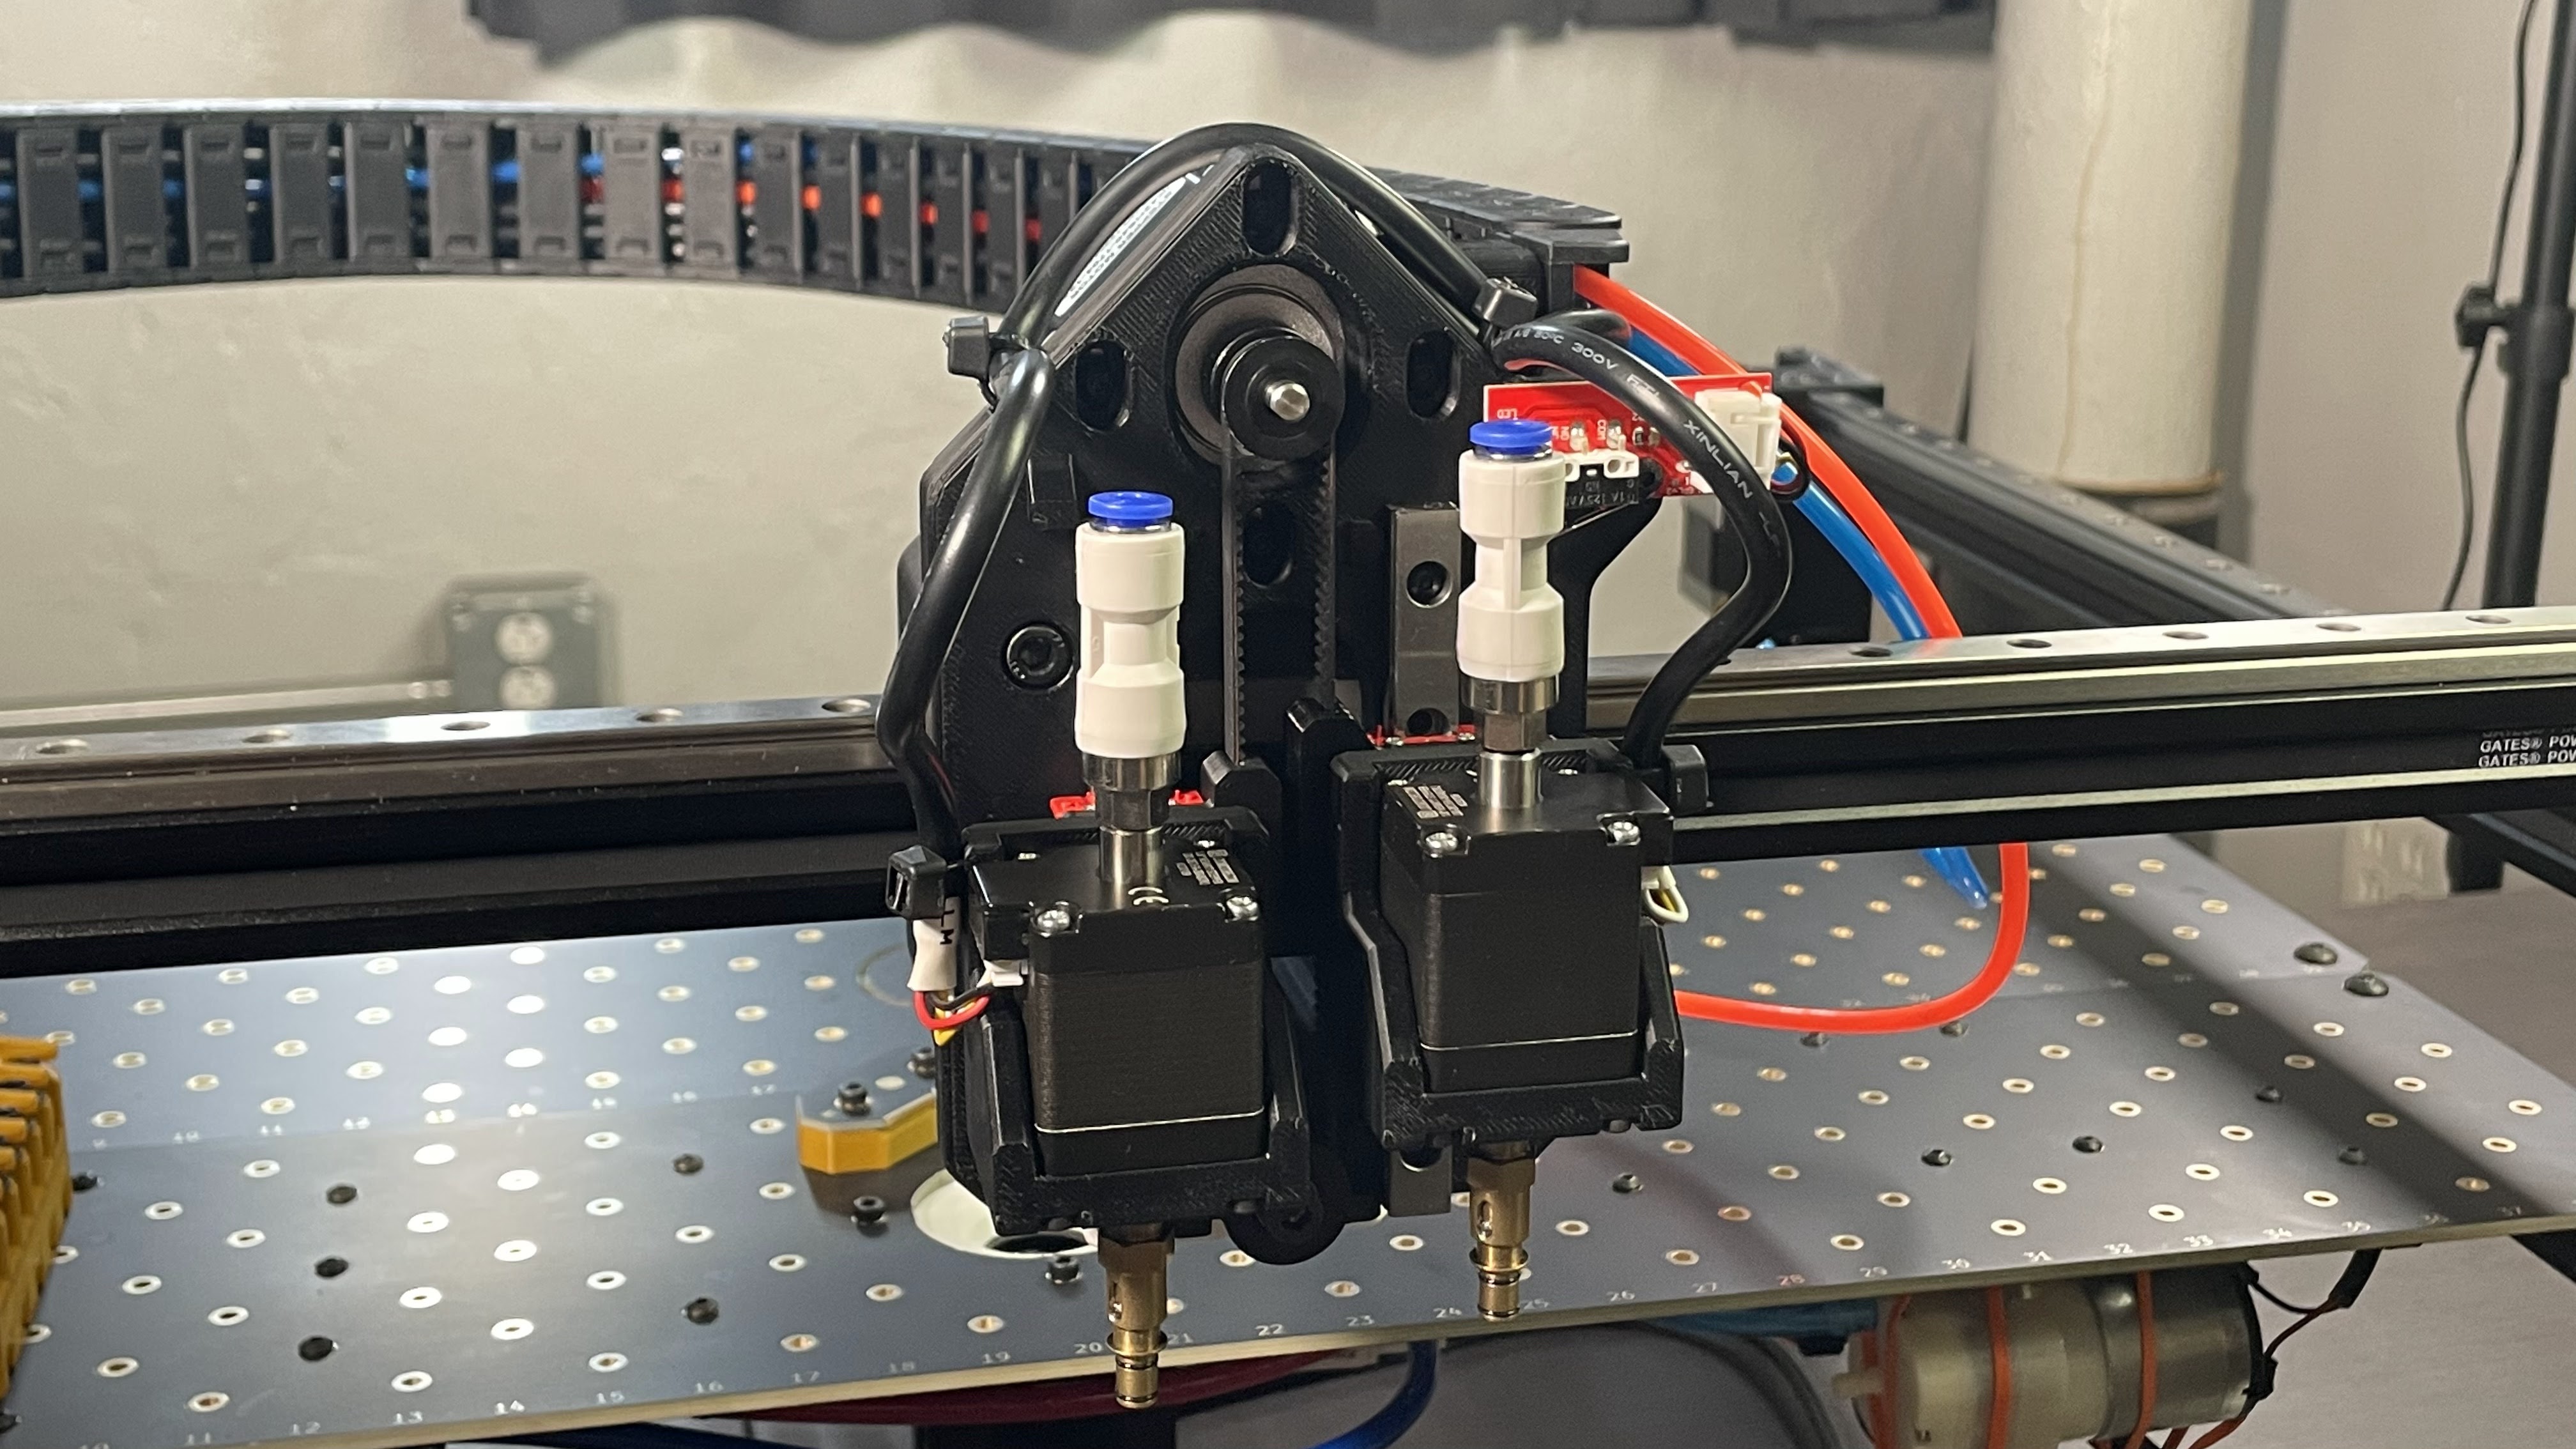 Motor cables connected